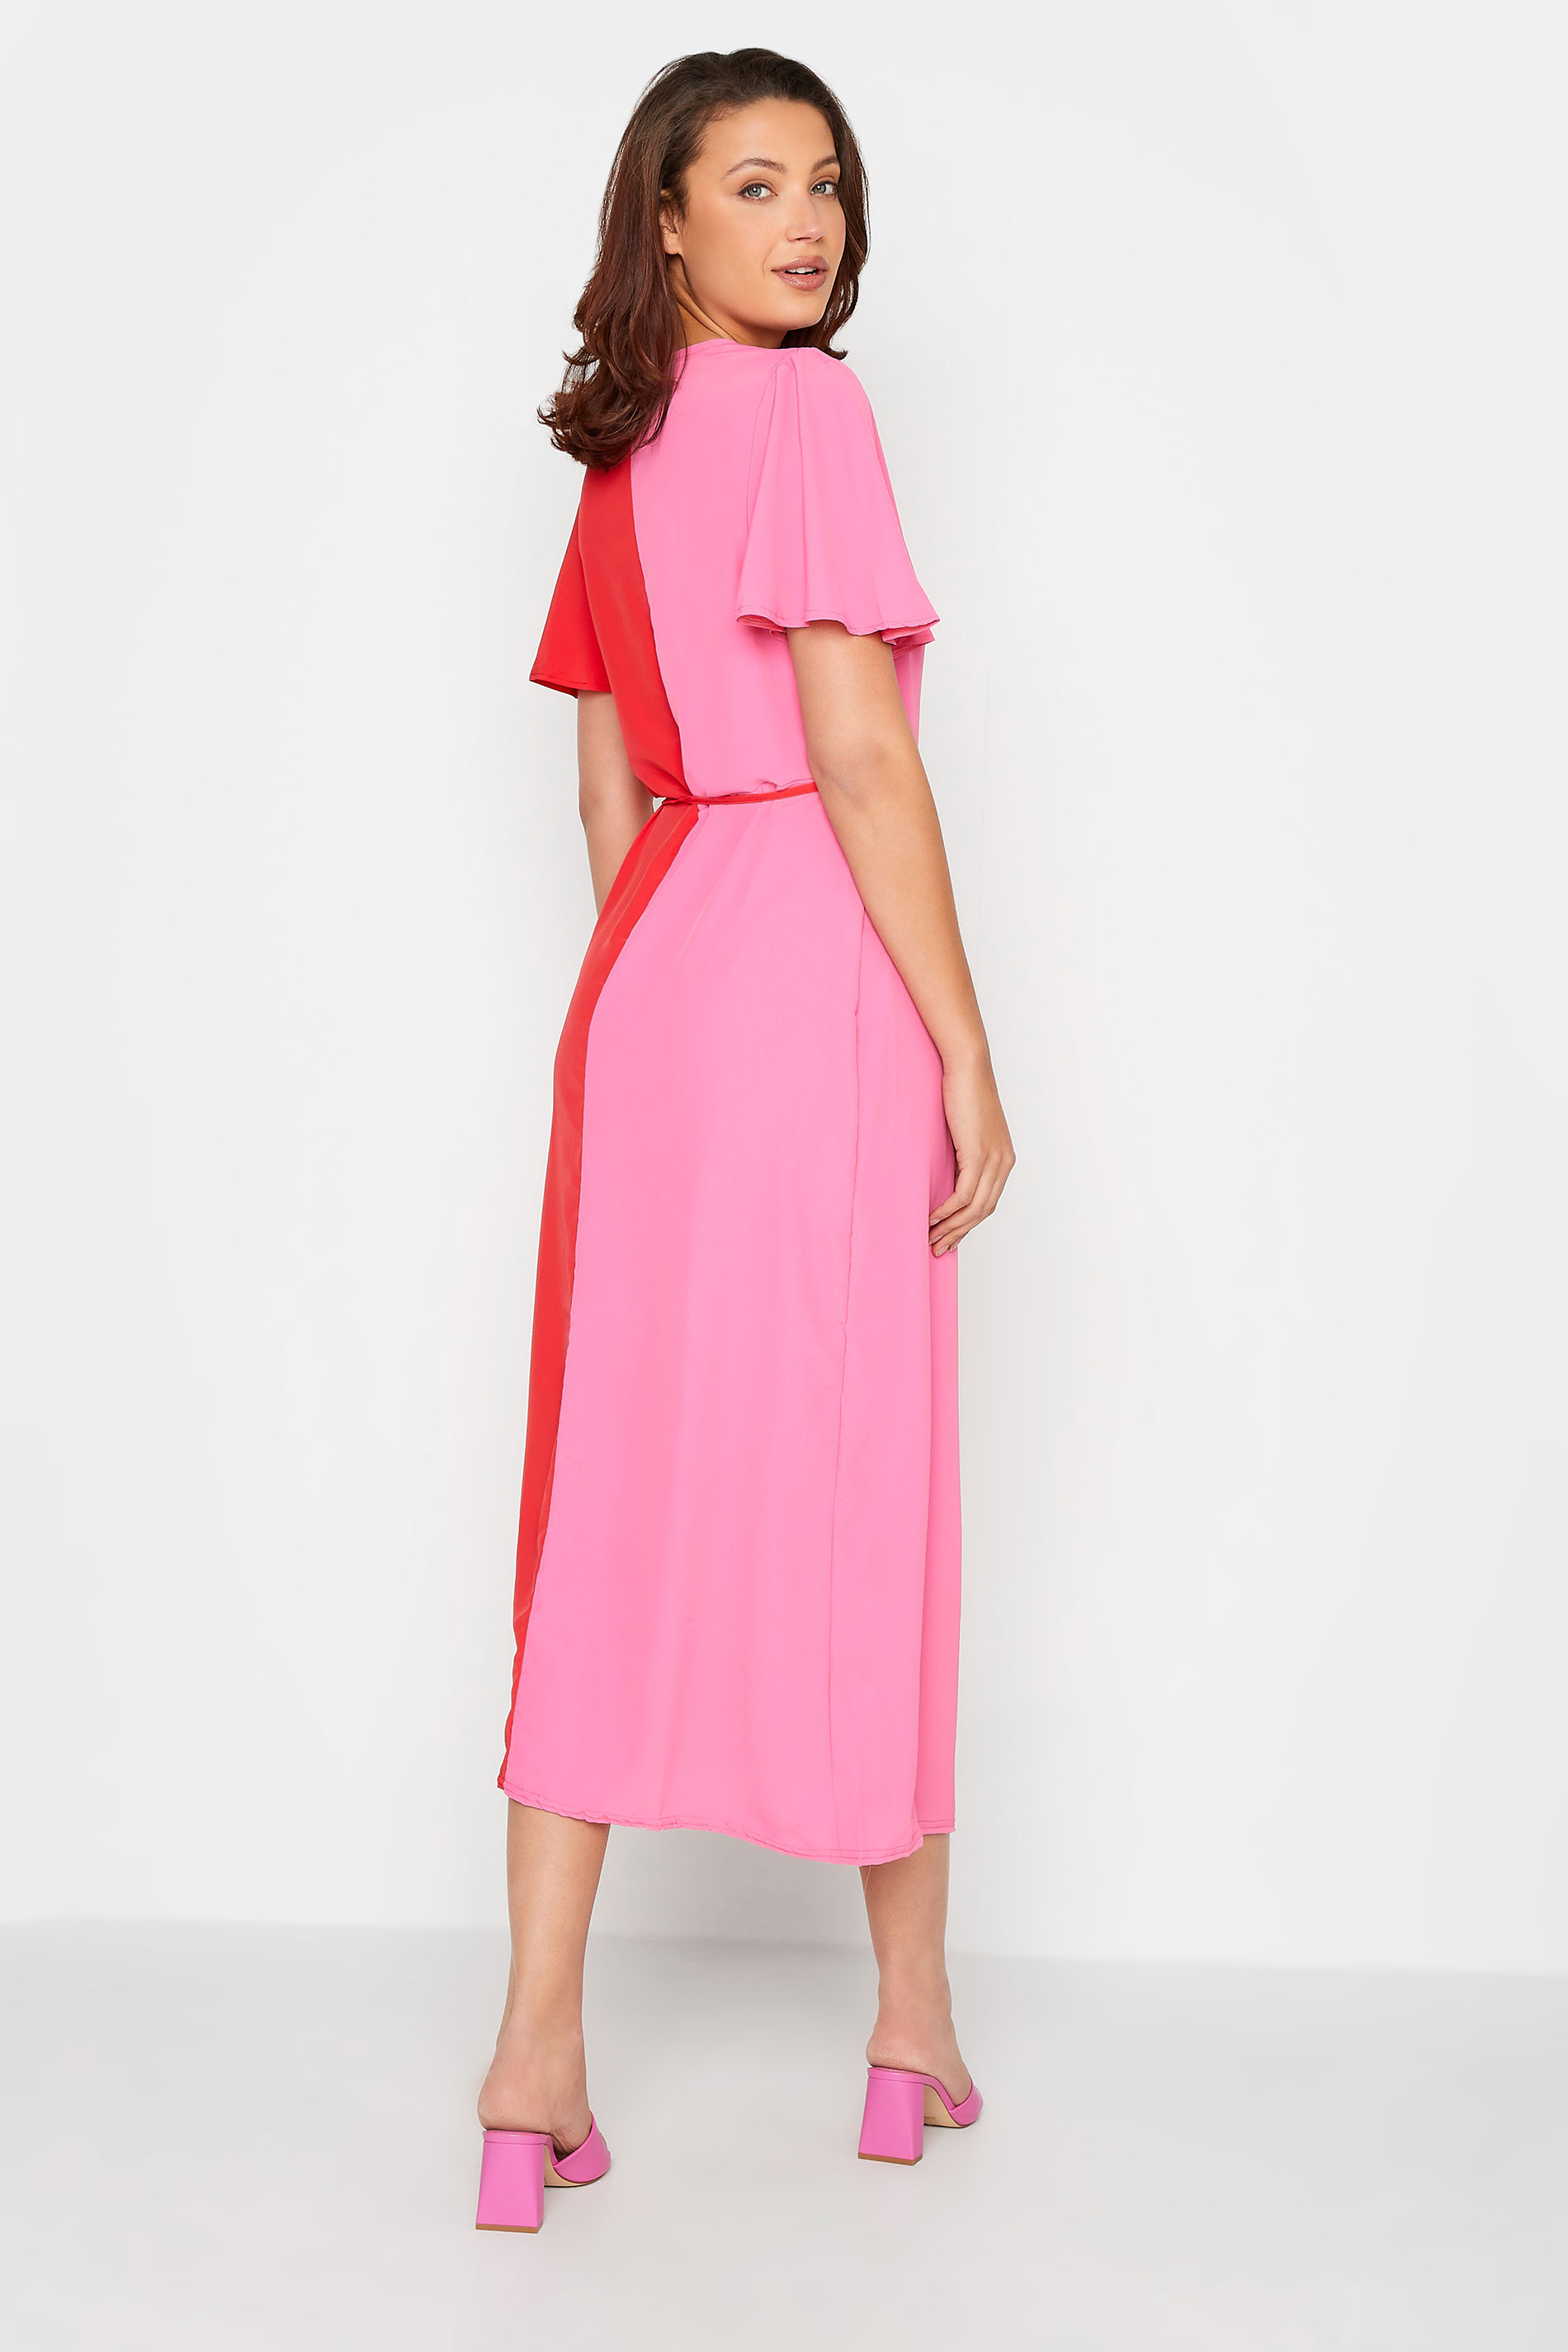 LTS Tall Women's Pink & Red Two Tone Wrap Dress | Long Tall Sally 3